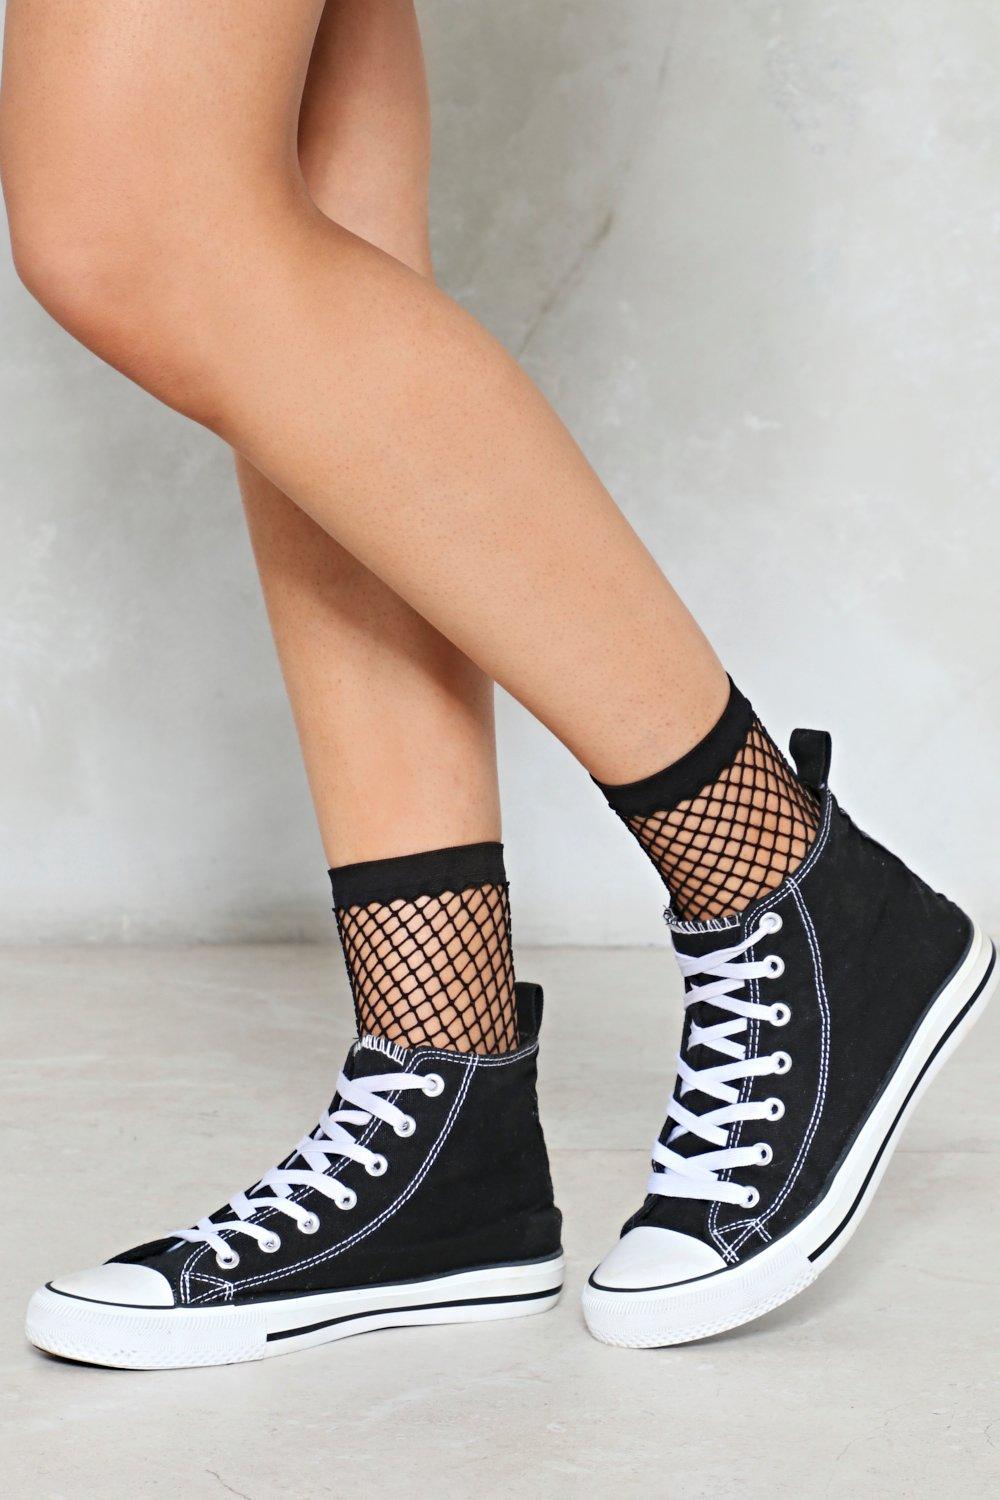 fishnet socks with converse